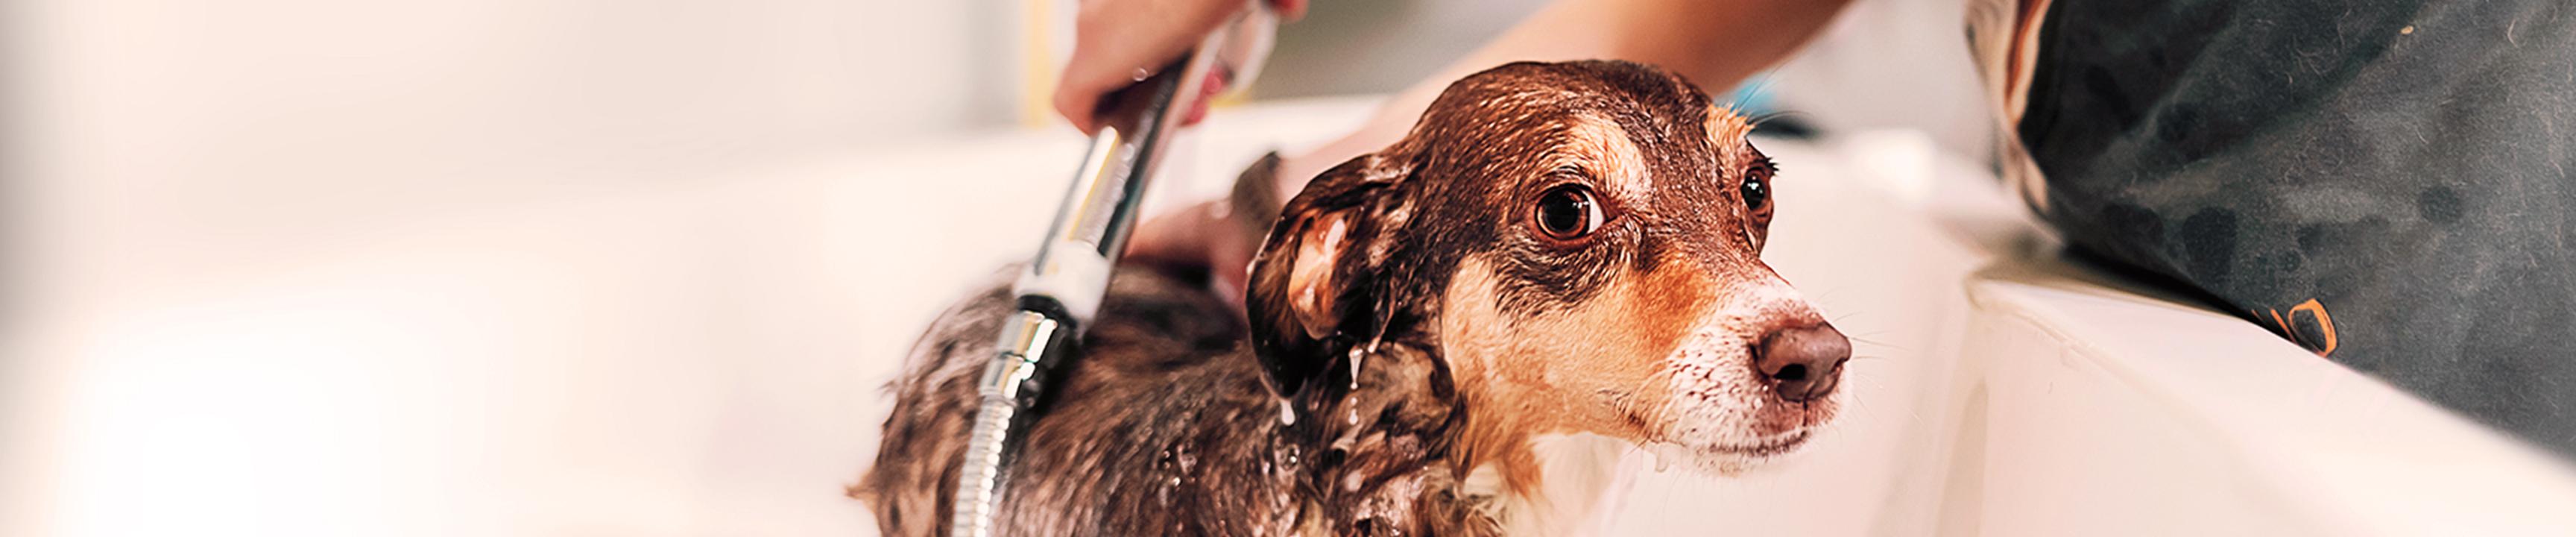 Dog getting bathed using a water-saving shower nozzle